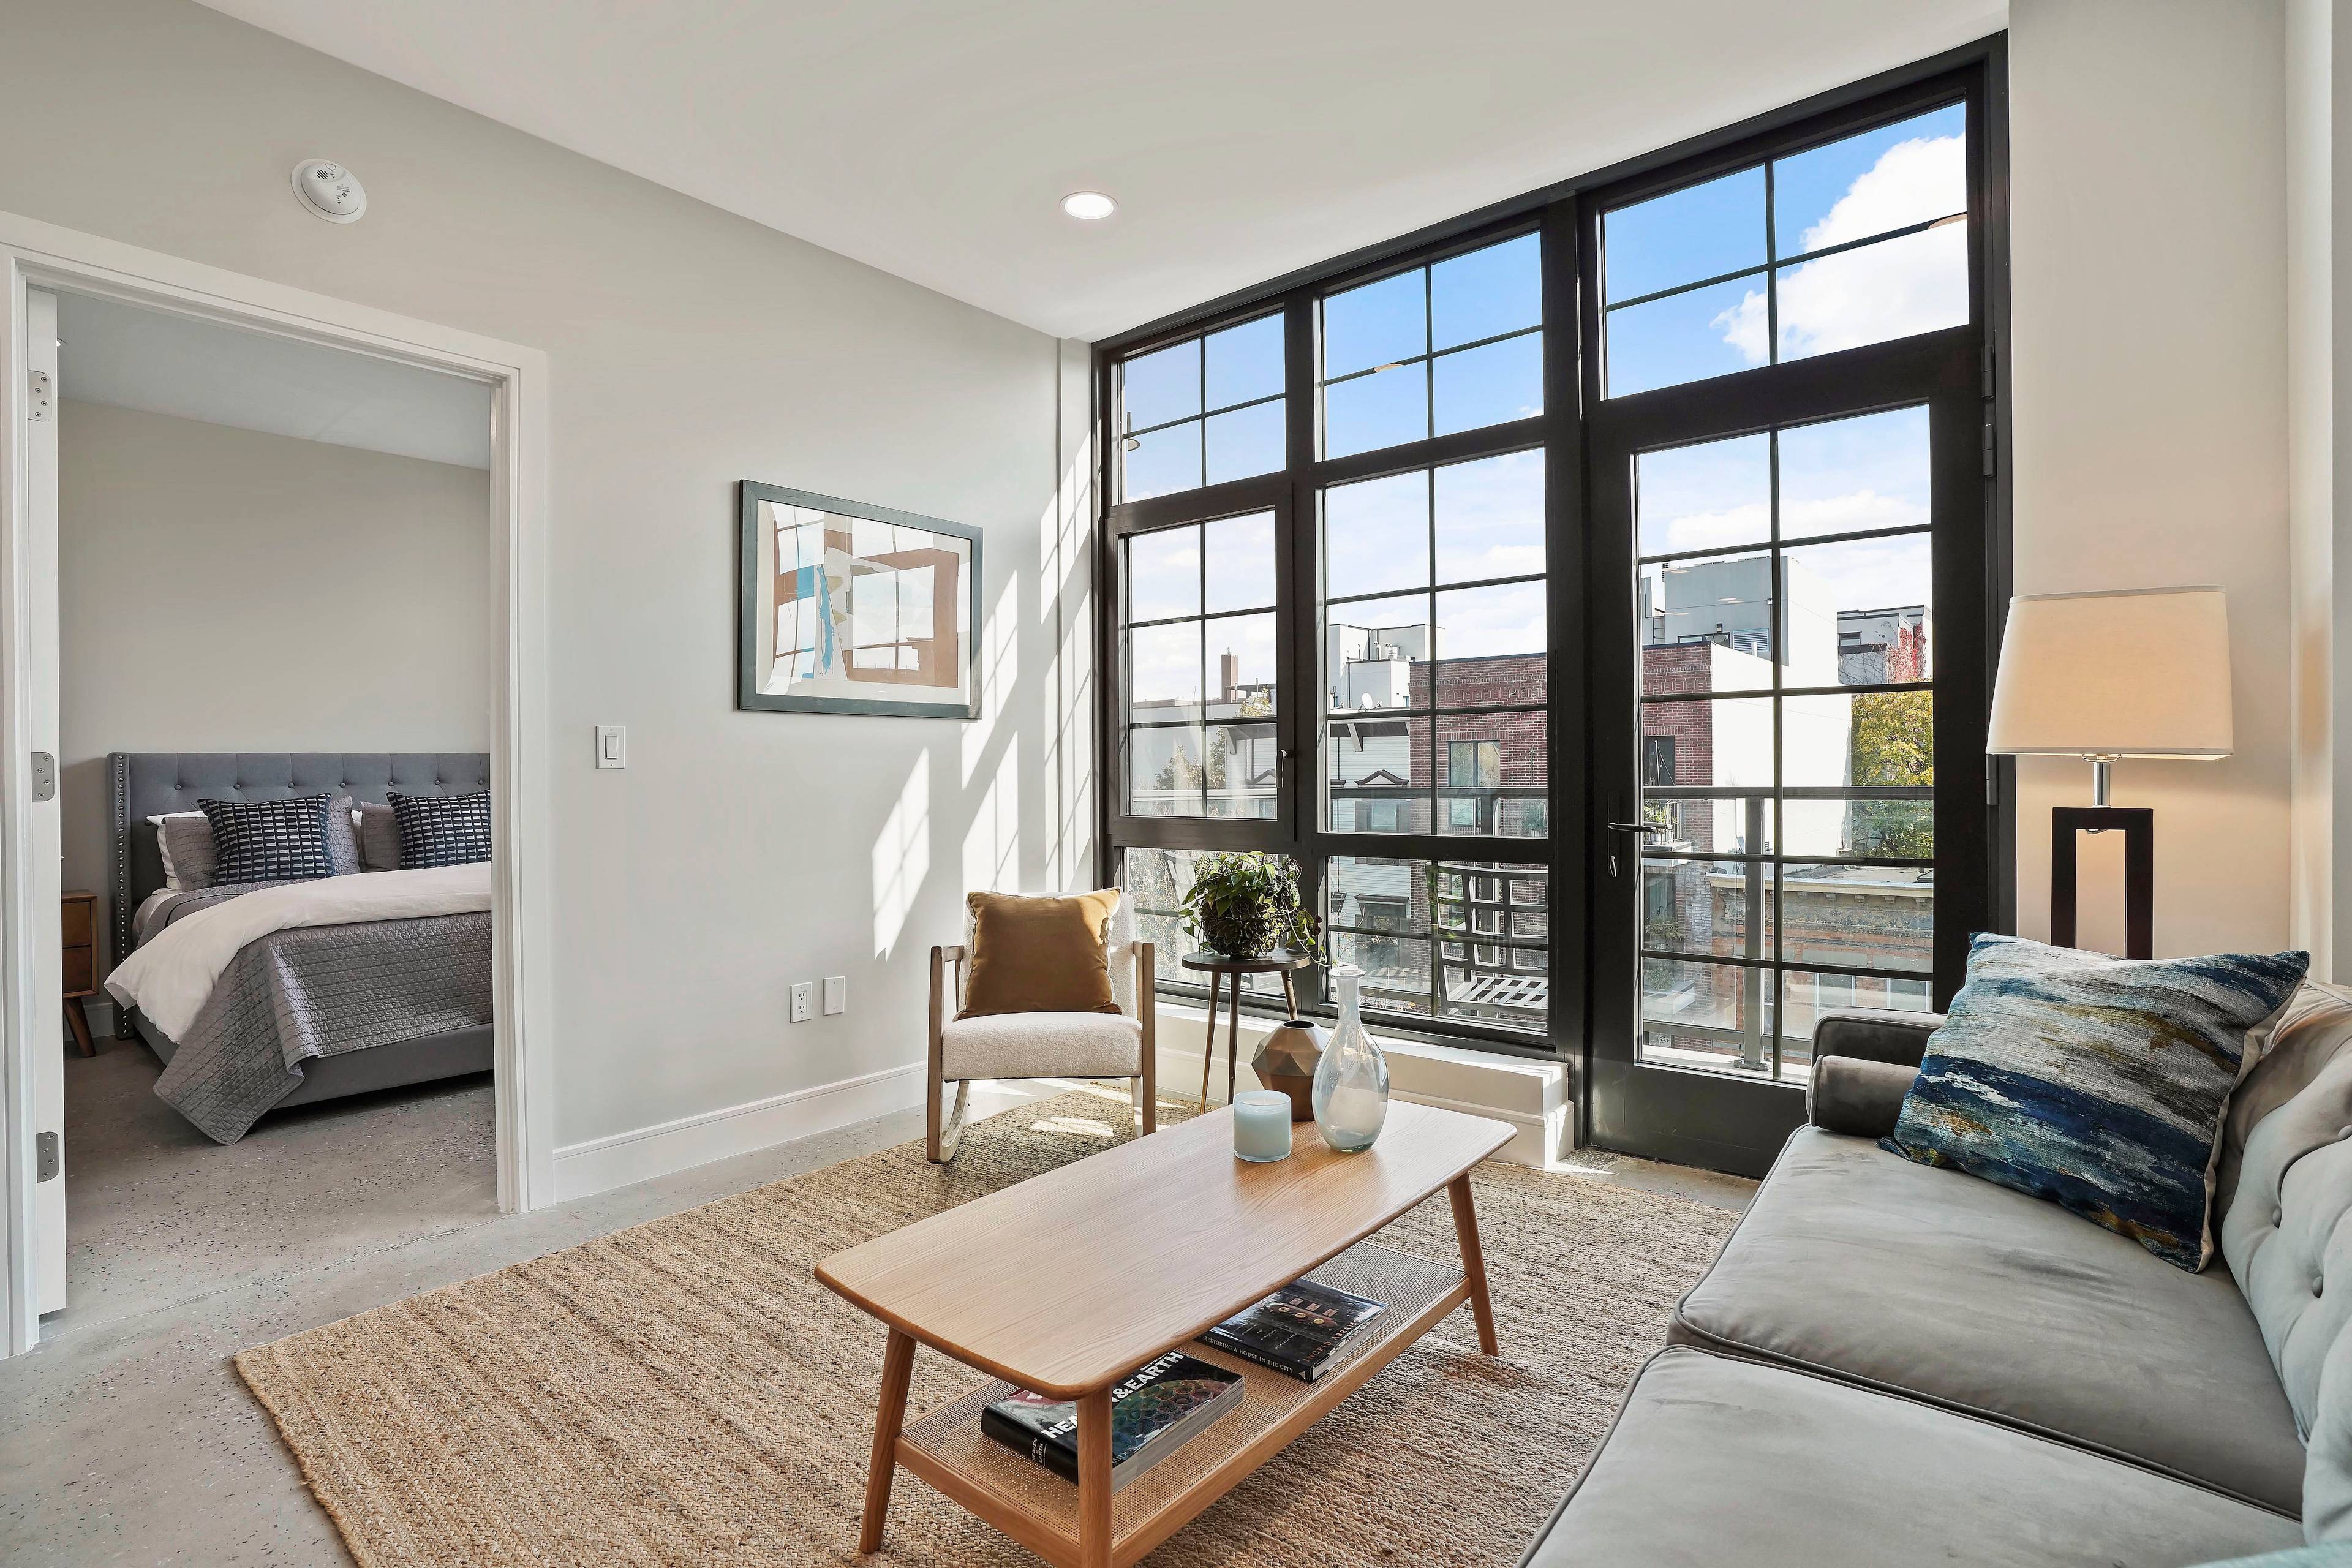 Introducing the epitome of modern urban living at this new 20 unit condo project in the heart of Bushwick a vibrant neighborhood that s been steadily capturing hearts with its ...